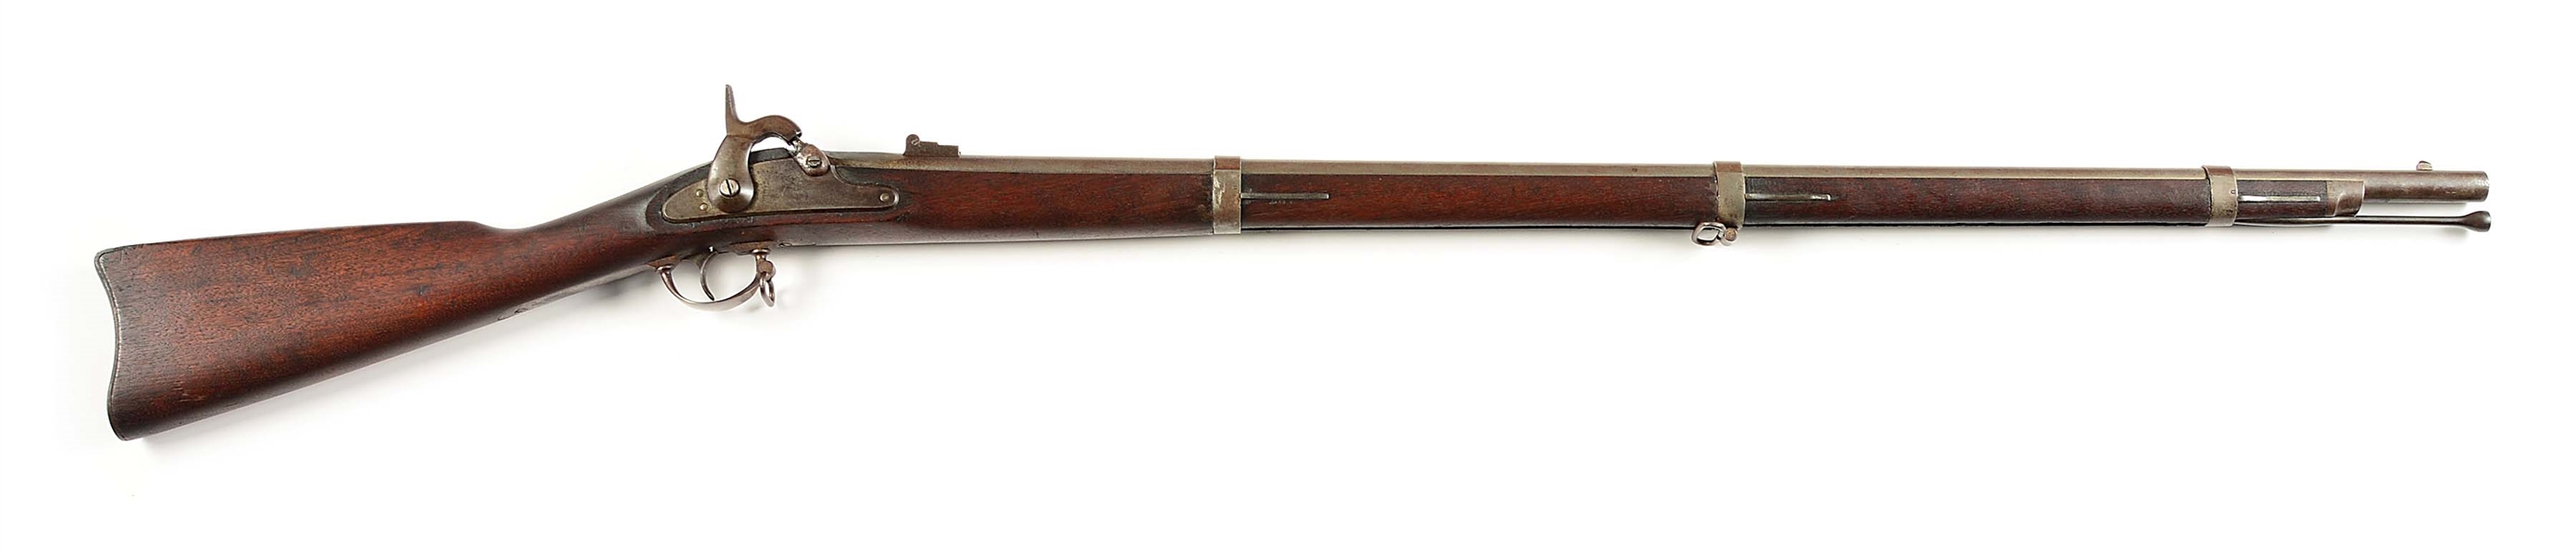 (A) PROVIDENCE TOOL COMPANY 1861 CONTRACT CIVIL WAR .58 CALIBER RIFLED-MUSKET DATED 1865.